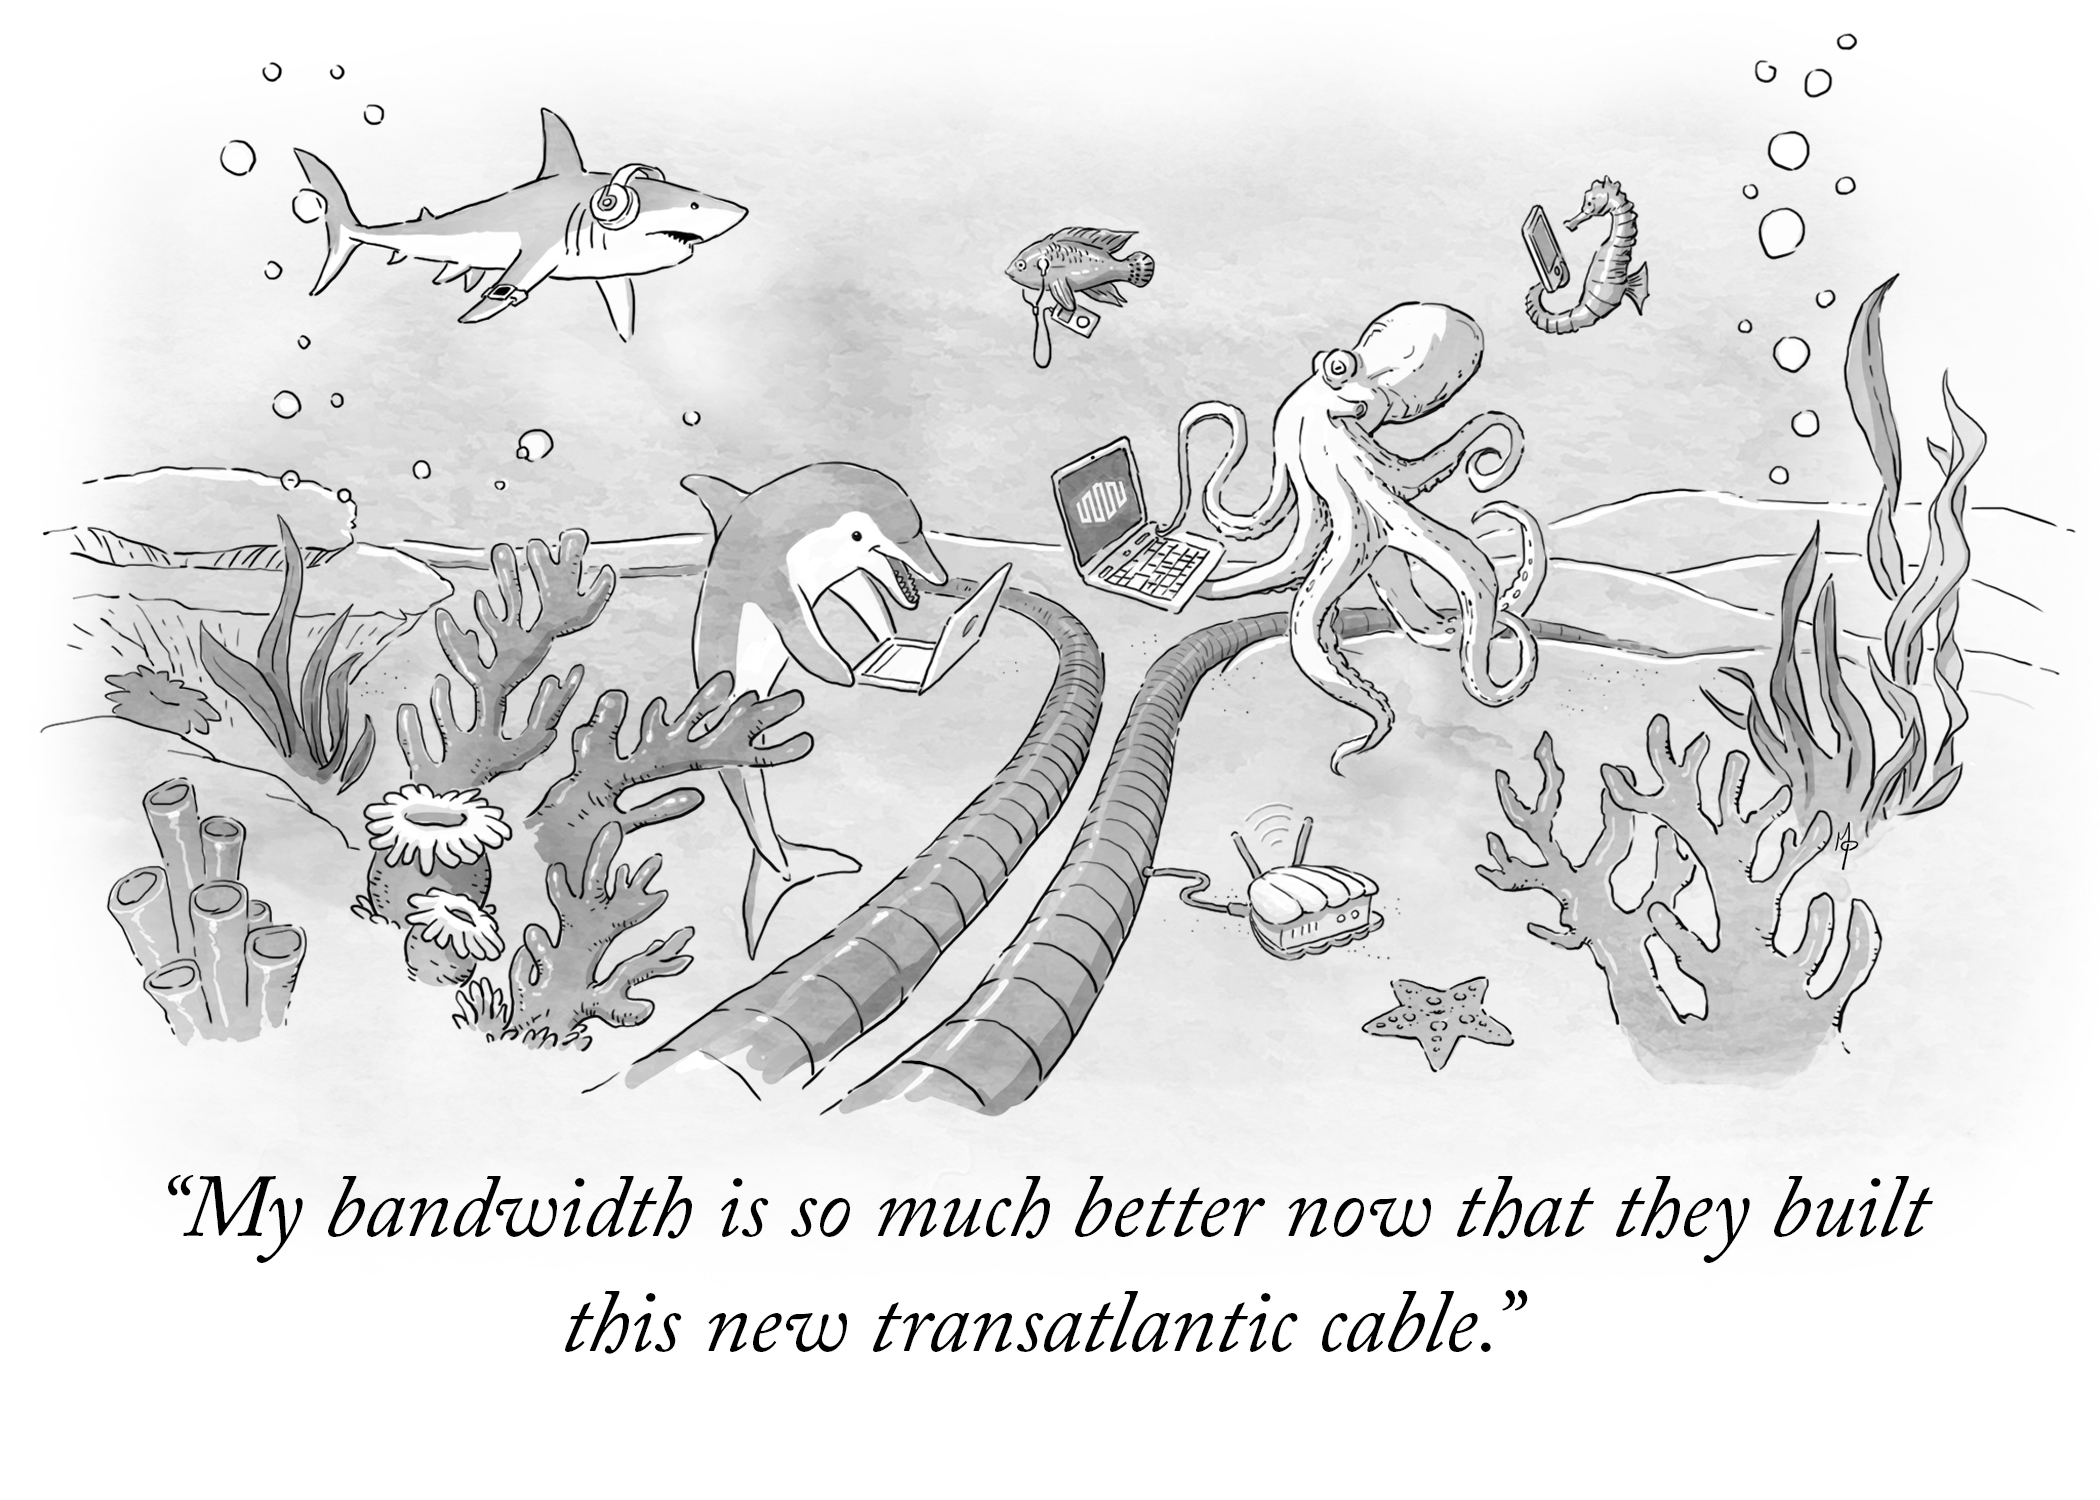 New Yorker style illustration of an underwater scene. Marine life is gathered around a Transatlantic cable with their Laptops and other digital devices. The caption reads: My bandwidth is so much better now that they built this new transatlantic cable